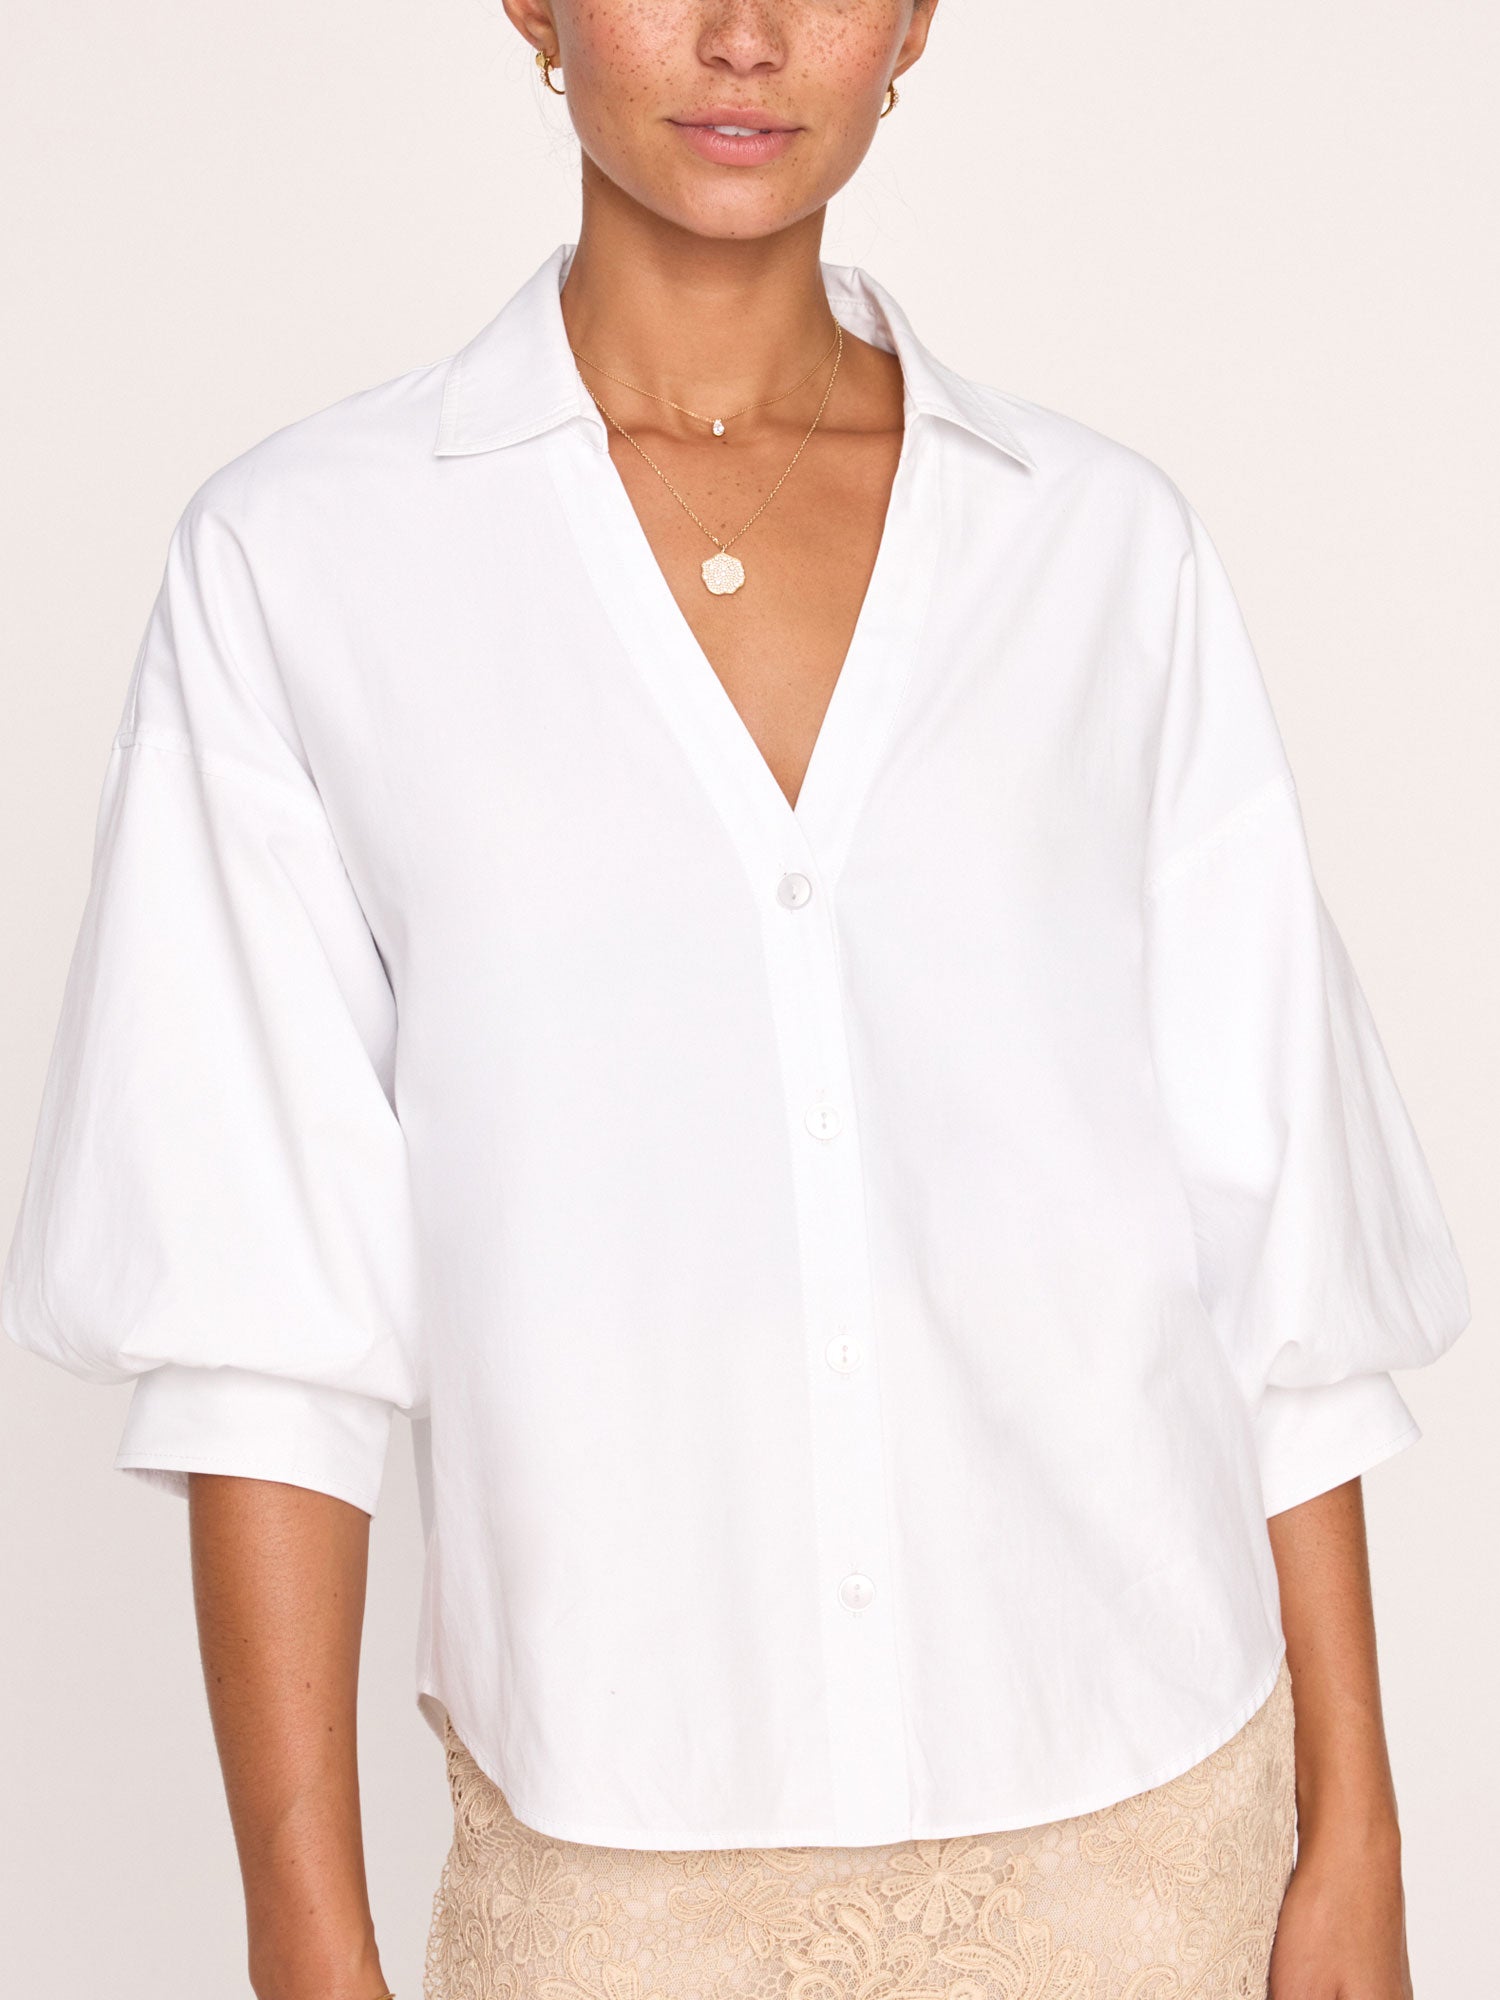 Kate V-neck button up white shirt front view 2